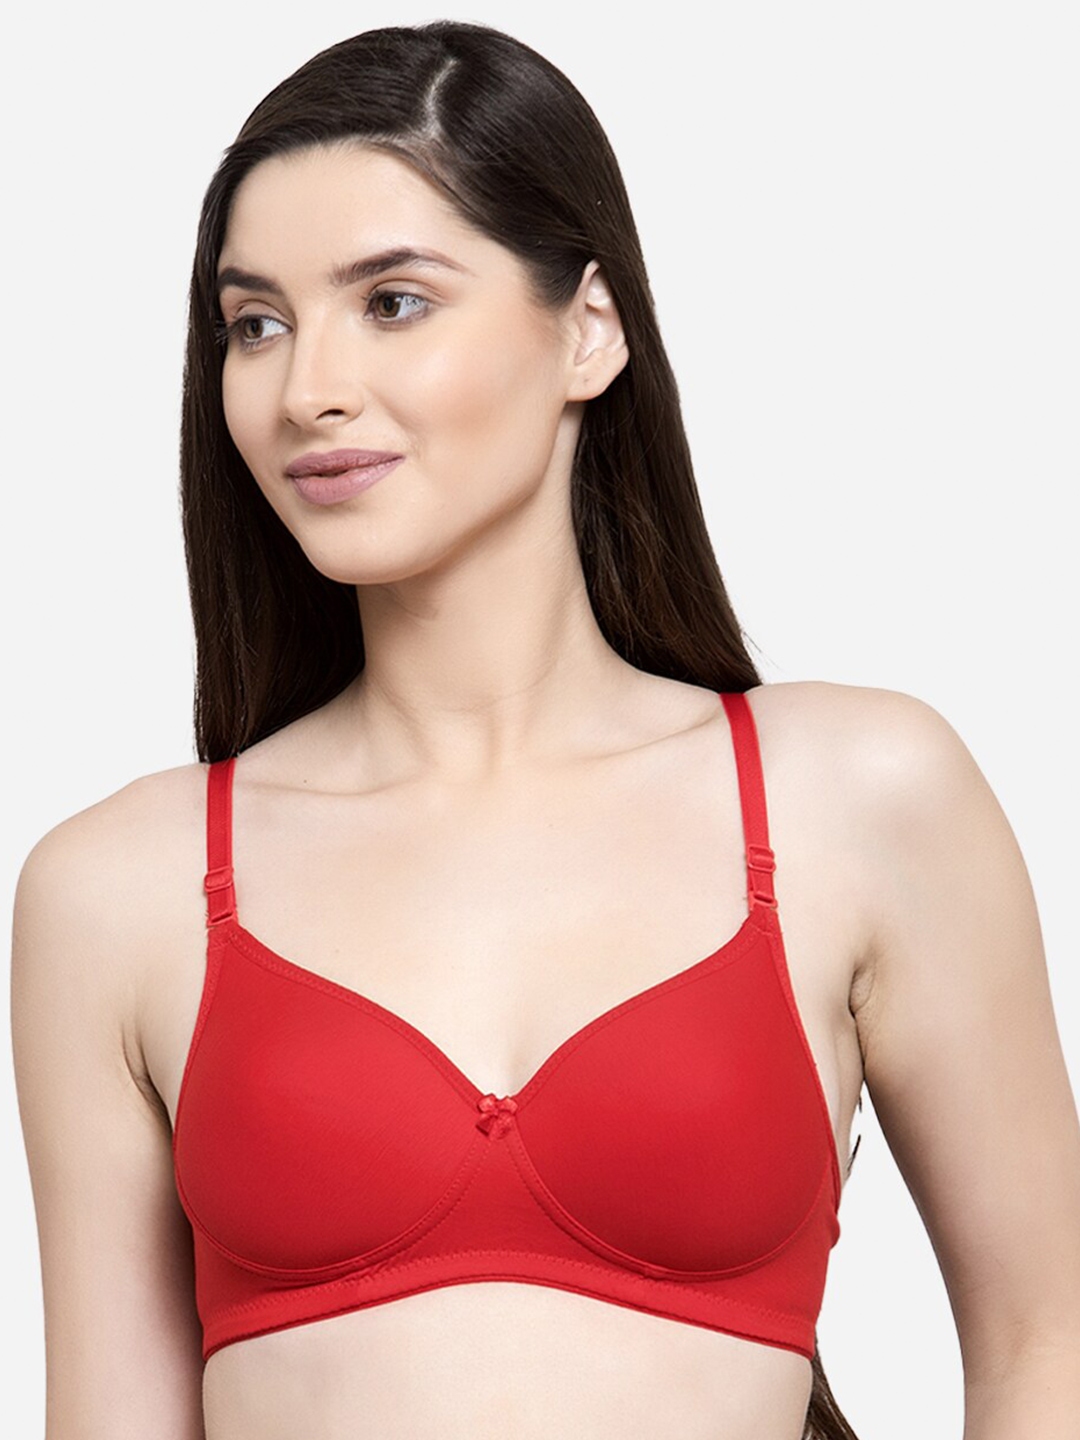 Buy GROVERSONS Paris Beauty Full Coverage Everyday Bra With All